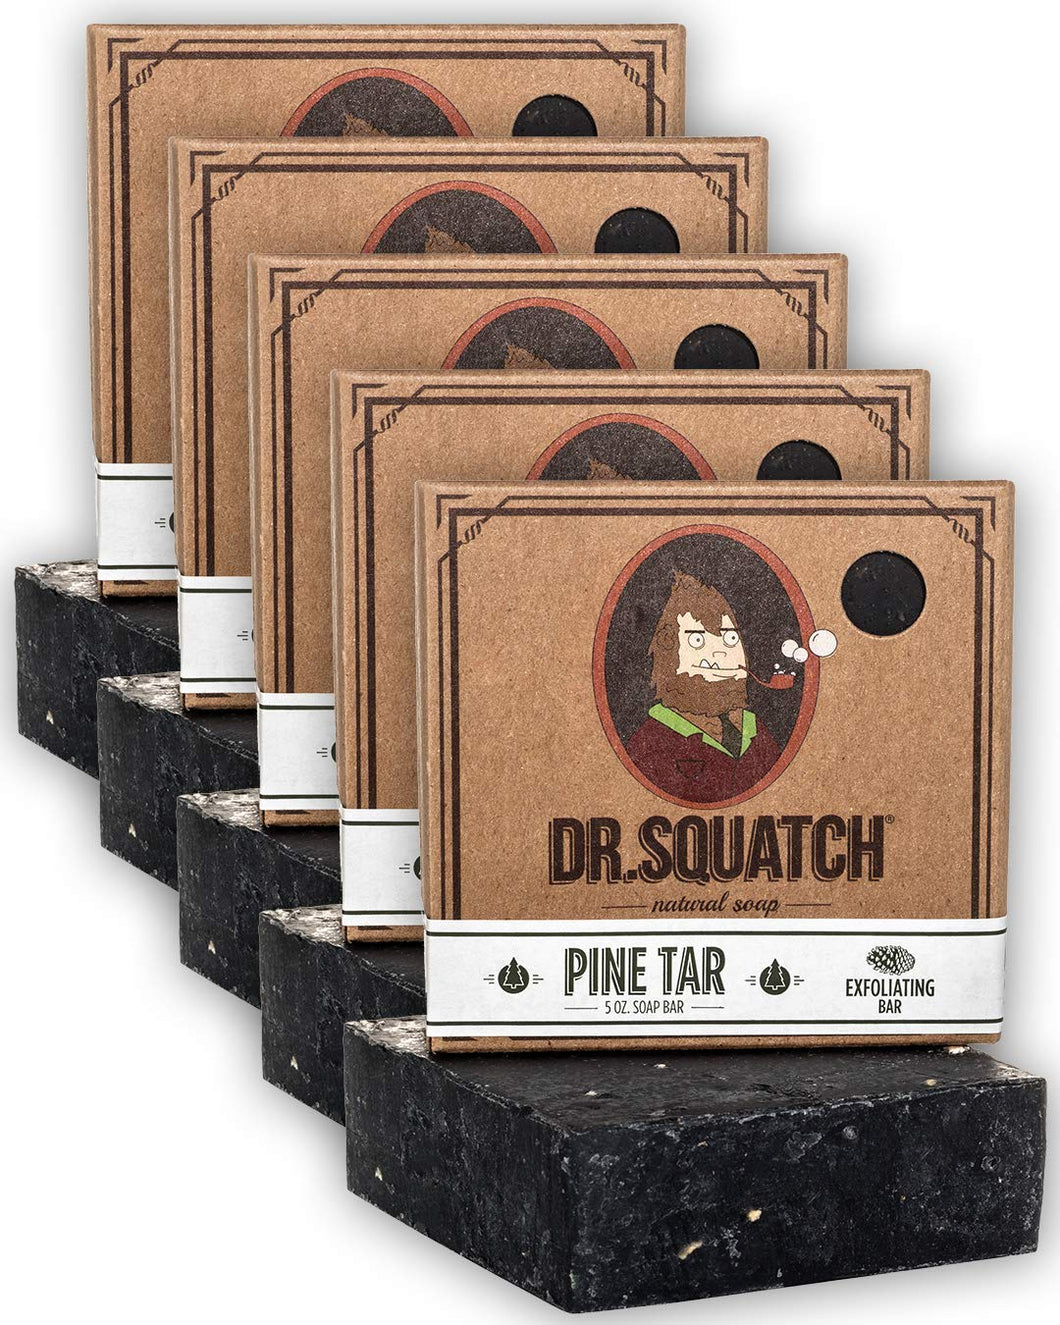 Dr. Squatch Pine Tar Soap 5-Pack Bundle – Mens Bar with Natural Woodsy Scent and Skin Exfoliating Scrub – Handmade with Pine, Coconut, Olive Organic Oils in USA (5 Bar Set)